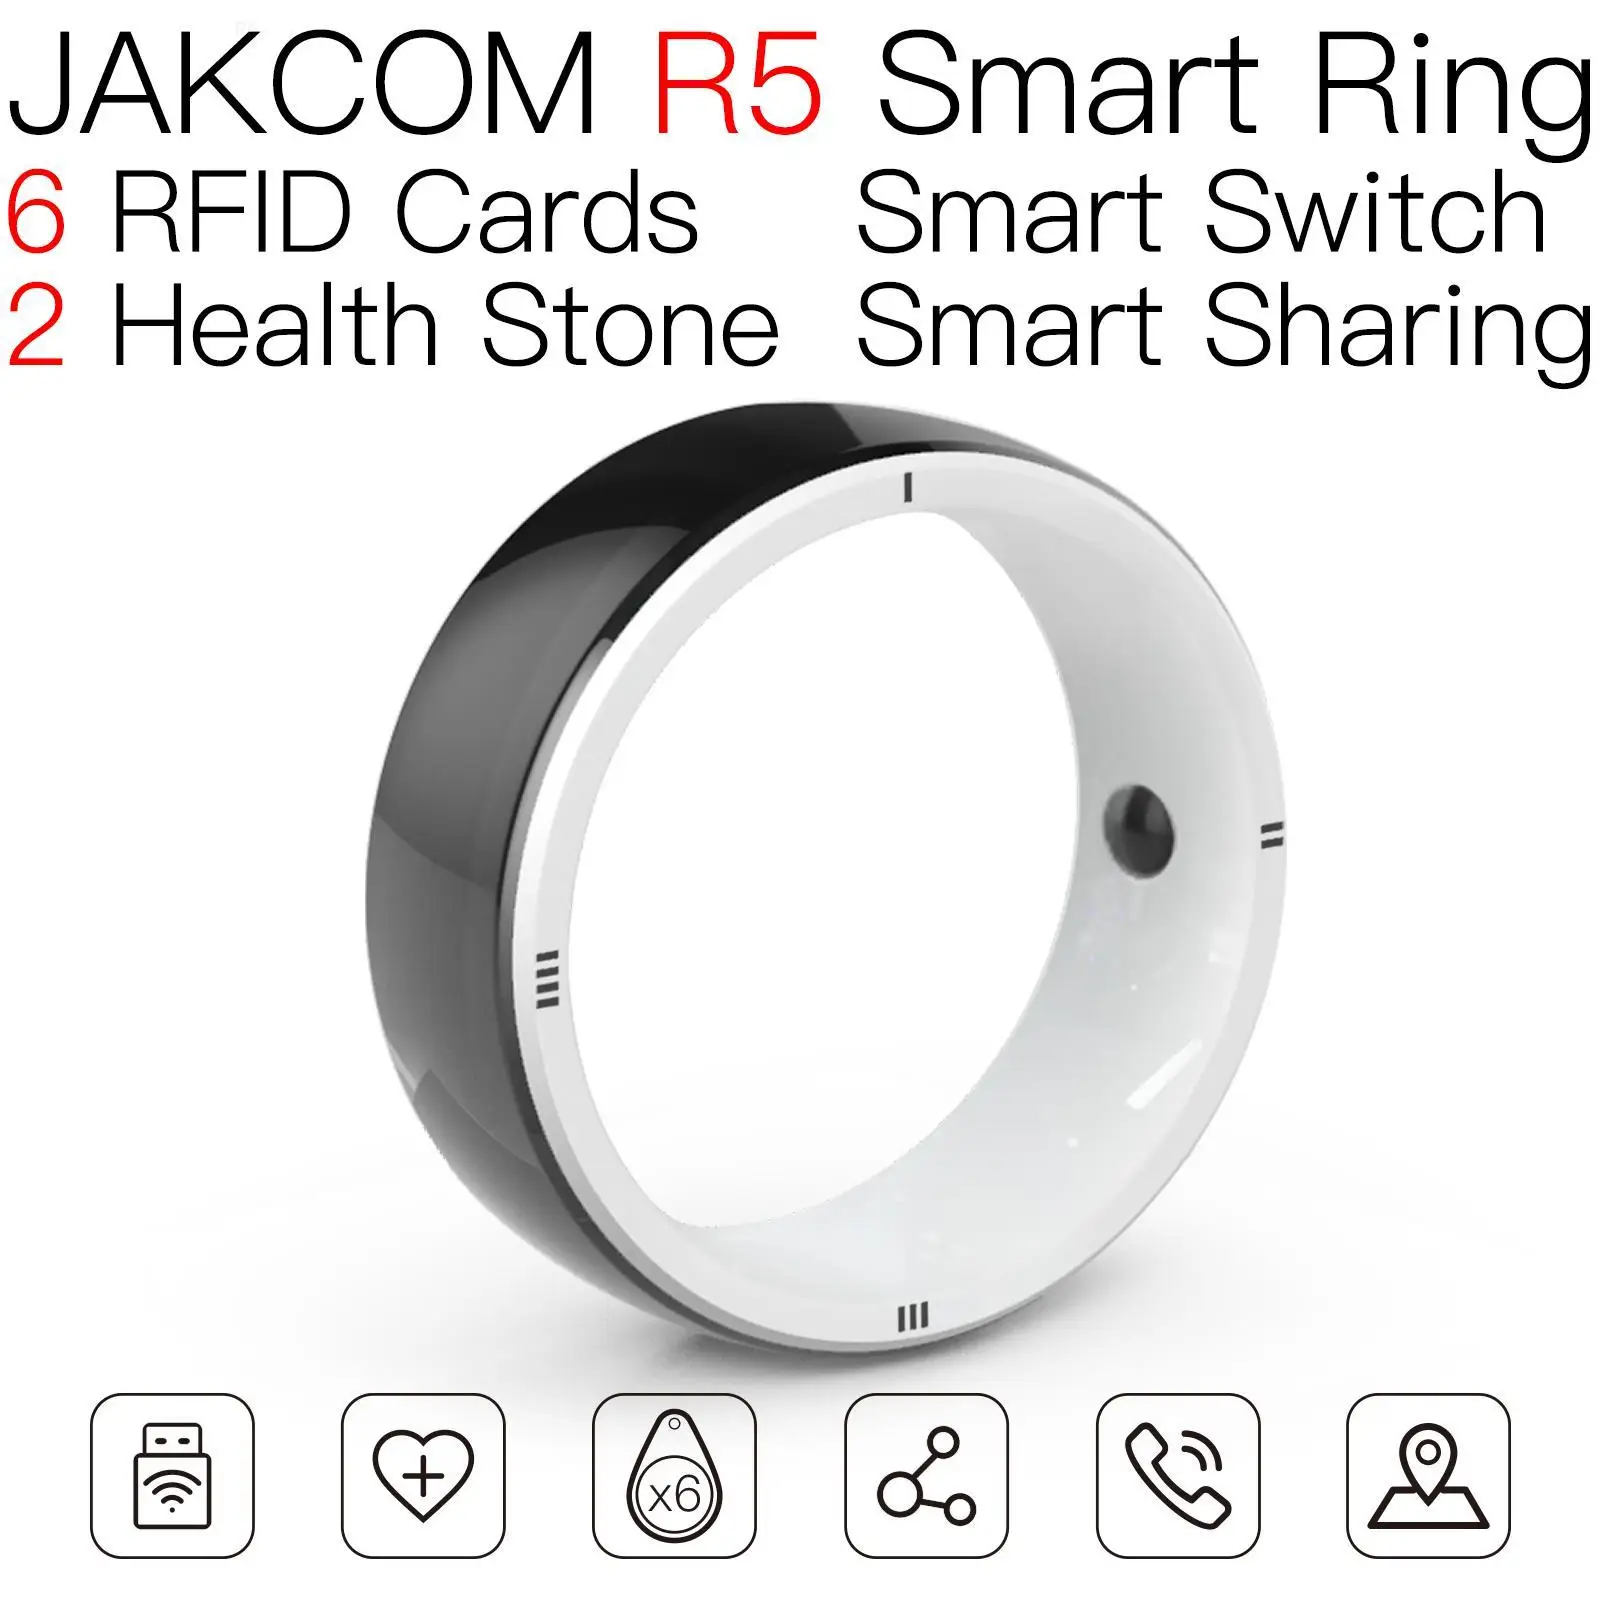 

JAKCOM R5 Smart Ring For men women tk4100 chip microchips id cows nfc tags programmable 125khz pigeon ring tag rfid laundry